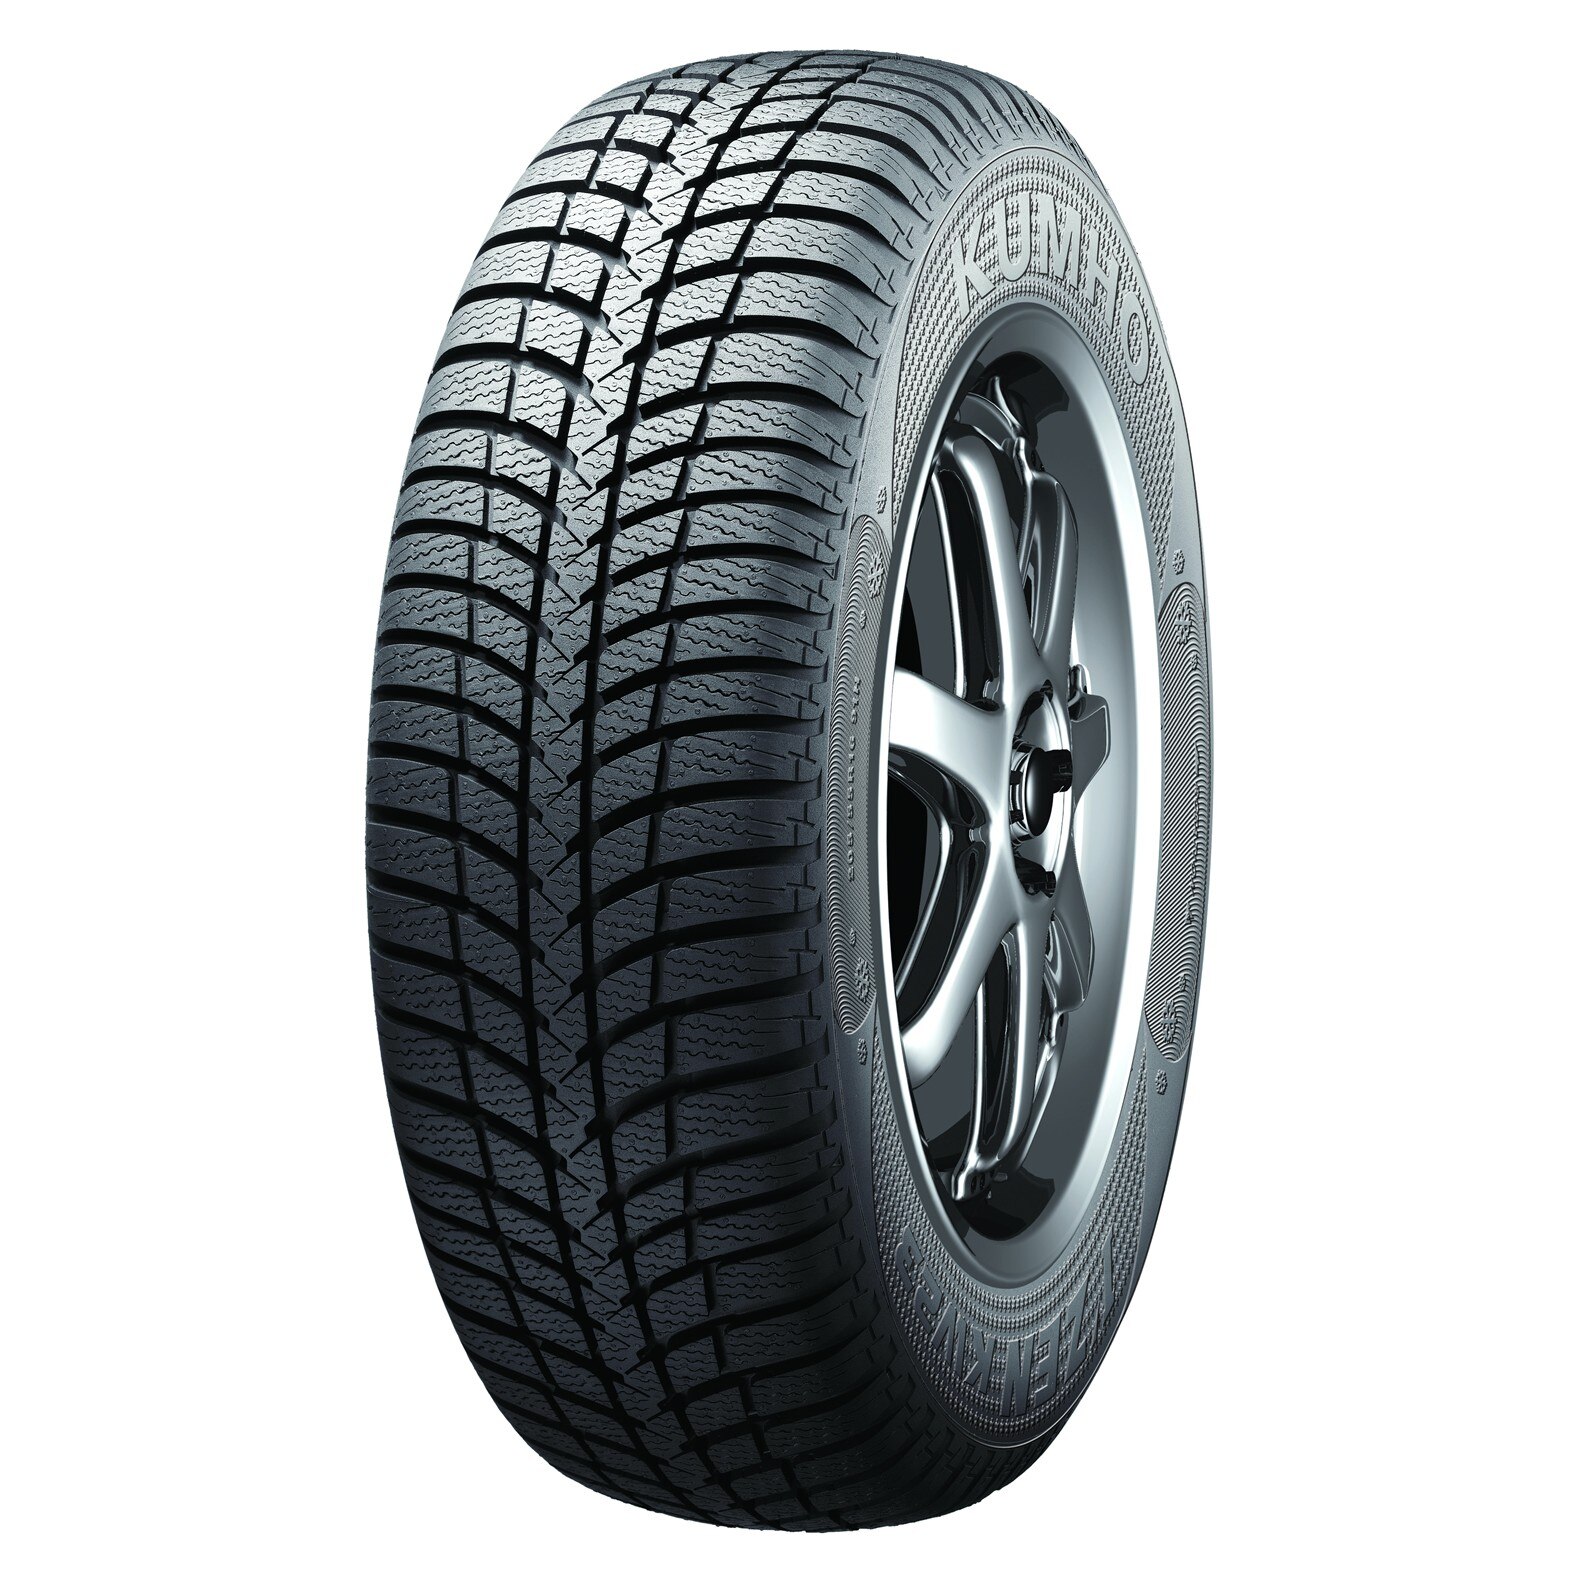 Stop by to know session have fun Anvelopa iarna Kumho KW23 I'zen, 185/65 R15 88T - eMAG.ro